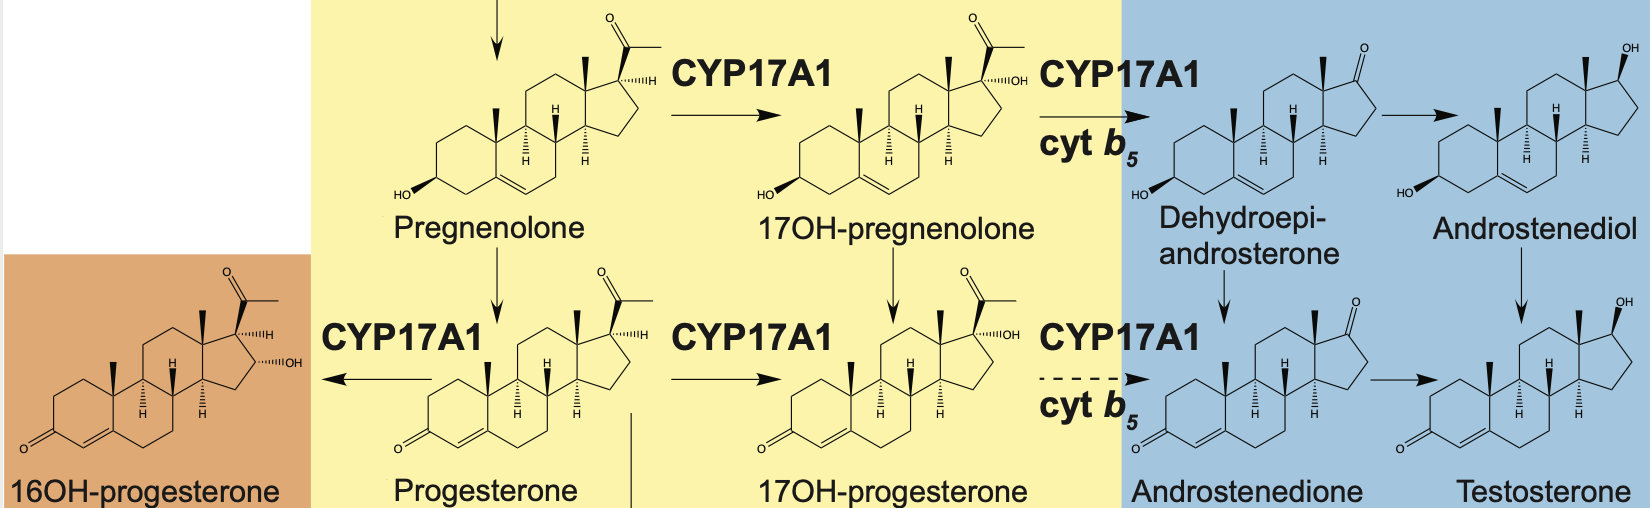 Steroidogenic cytochrome P450 17A1 structure and function